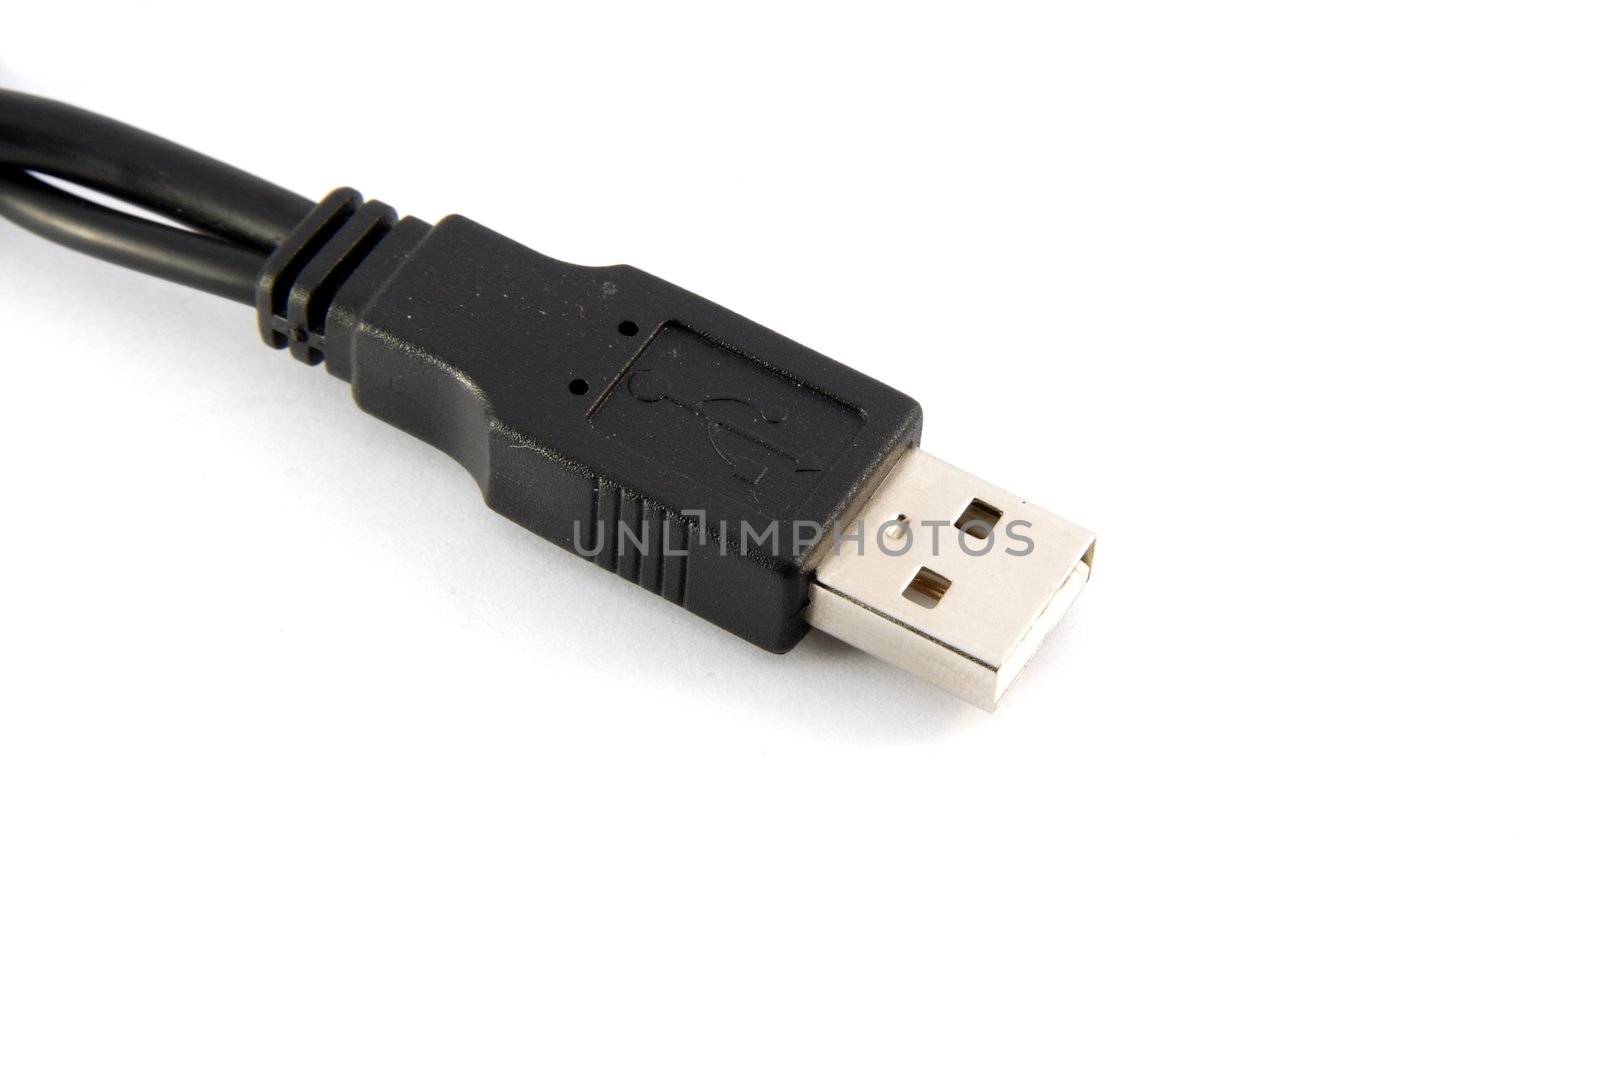 Usb cables on white background 